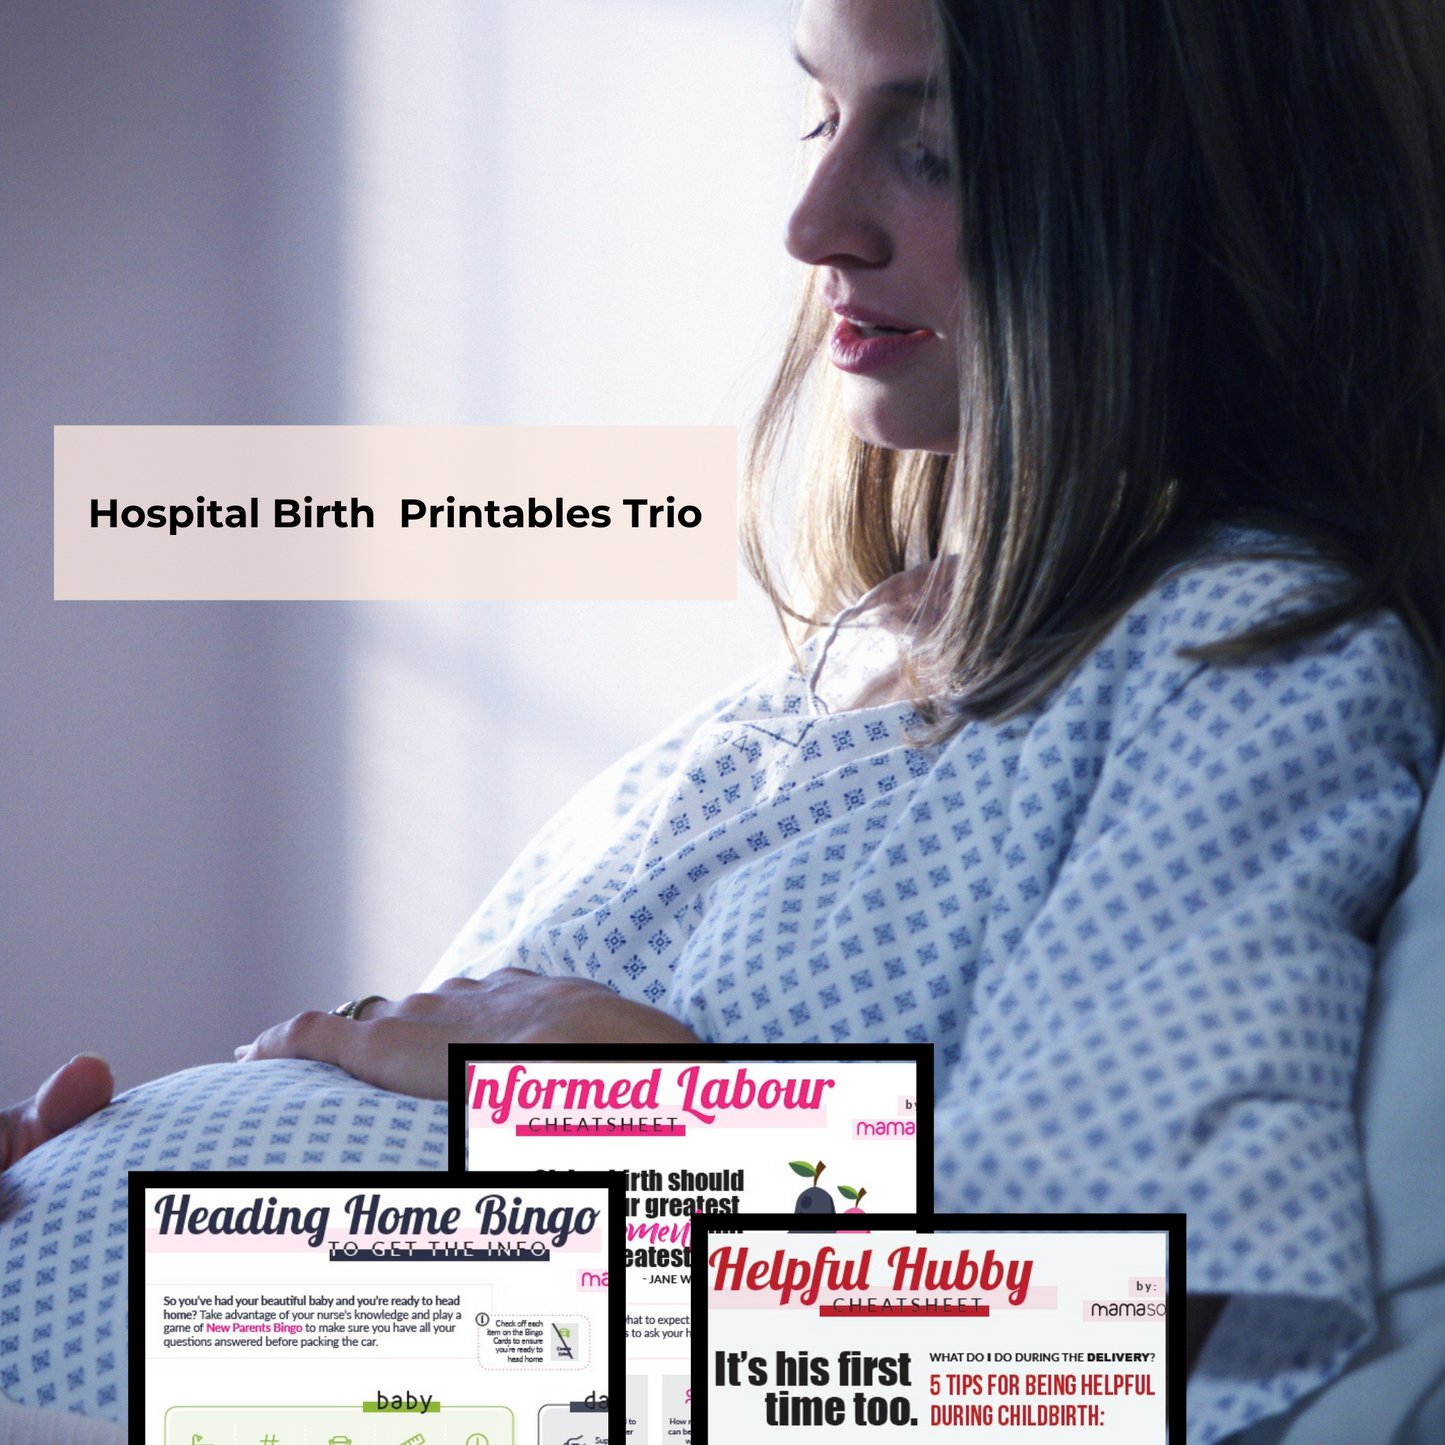 Image of pregnant woman in hospital gown with overlaying images of Hospital Birth Printables Trio: Informed Labour Cheatsheet, Heading Home Bingo to Get the Info and Helpful Hubby Cheatsheet